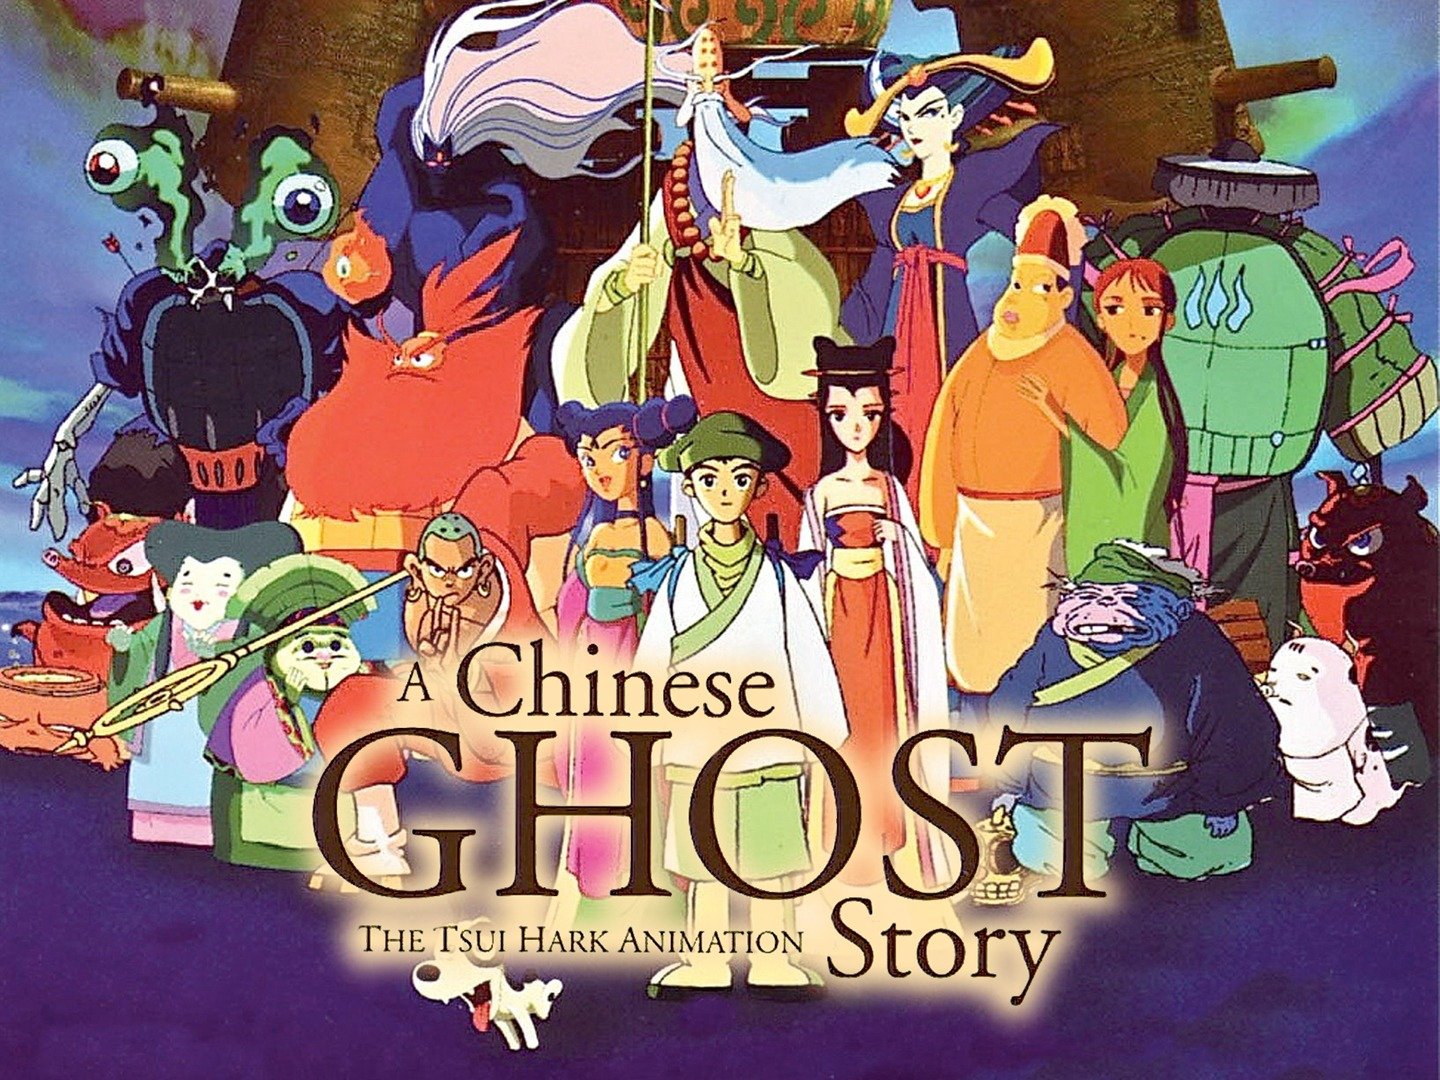 english games like a chinese ghost story